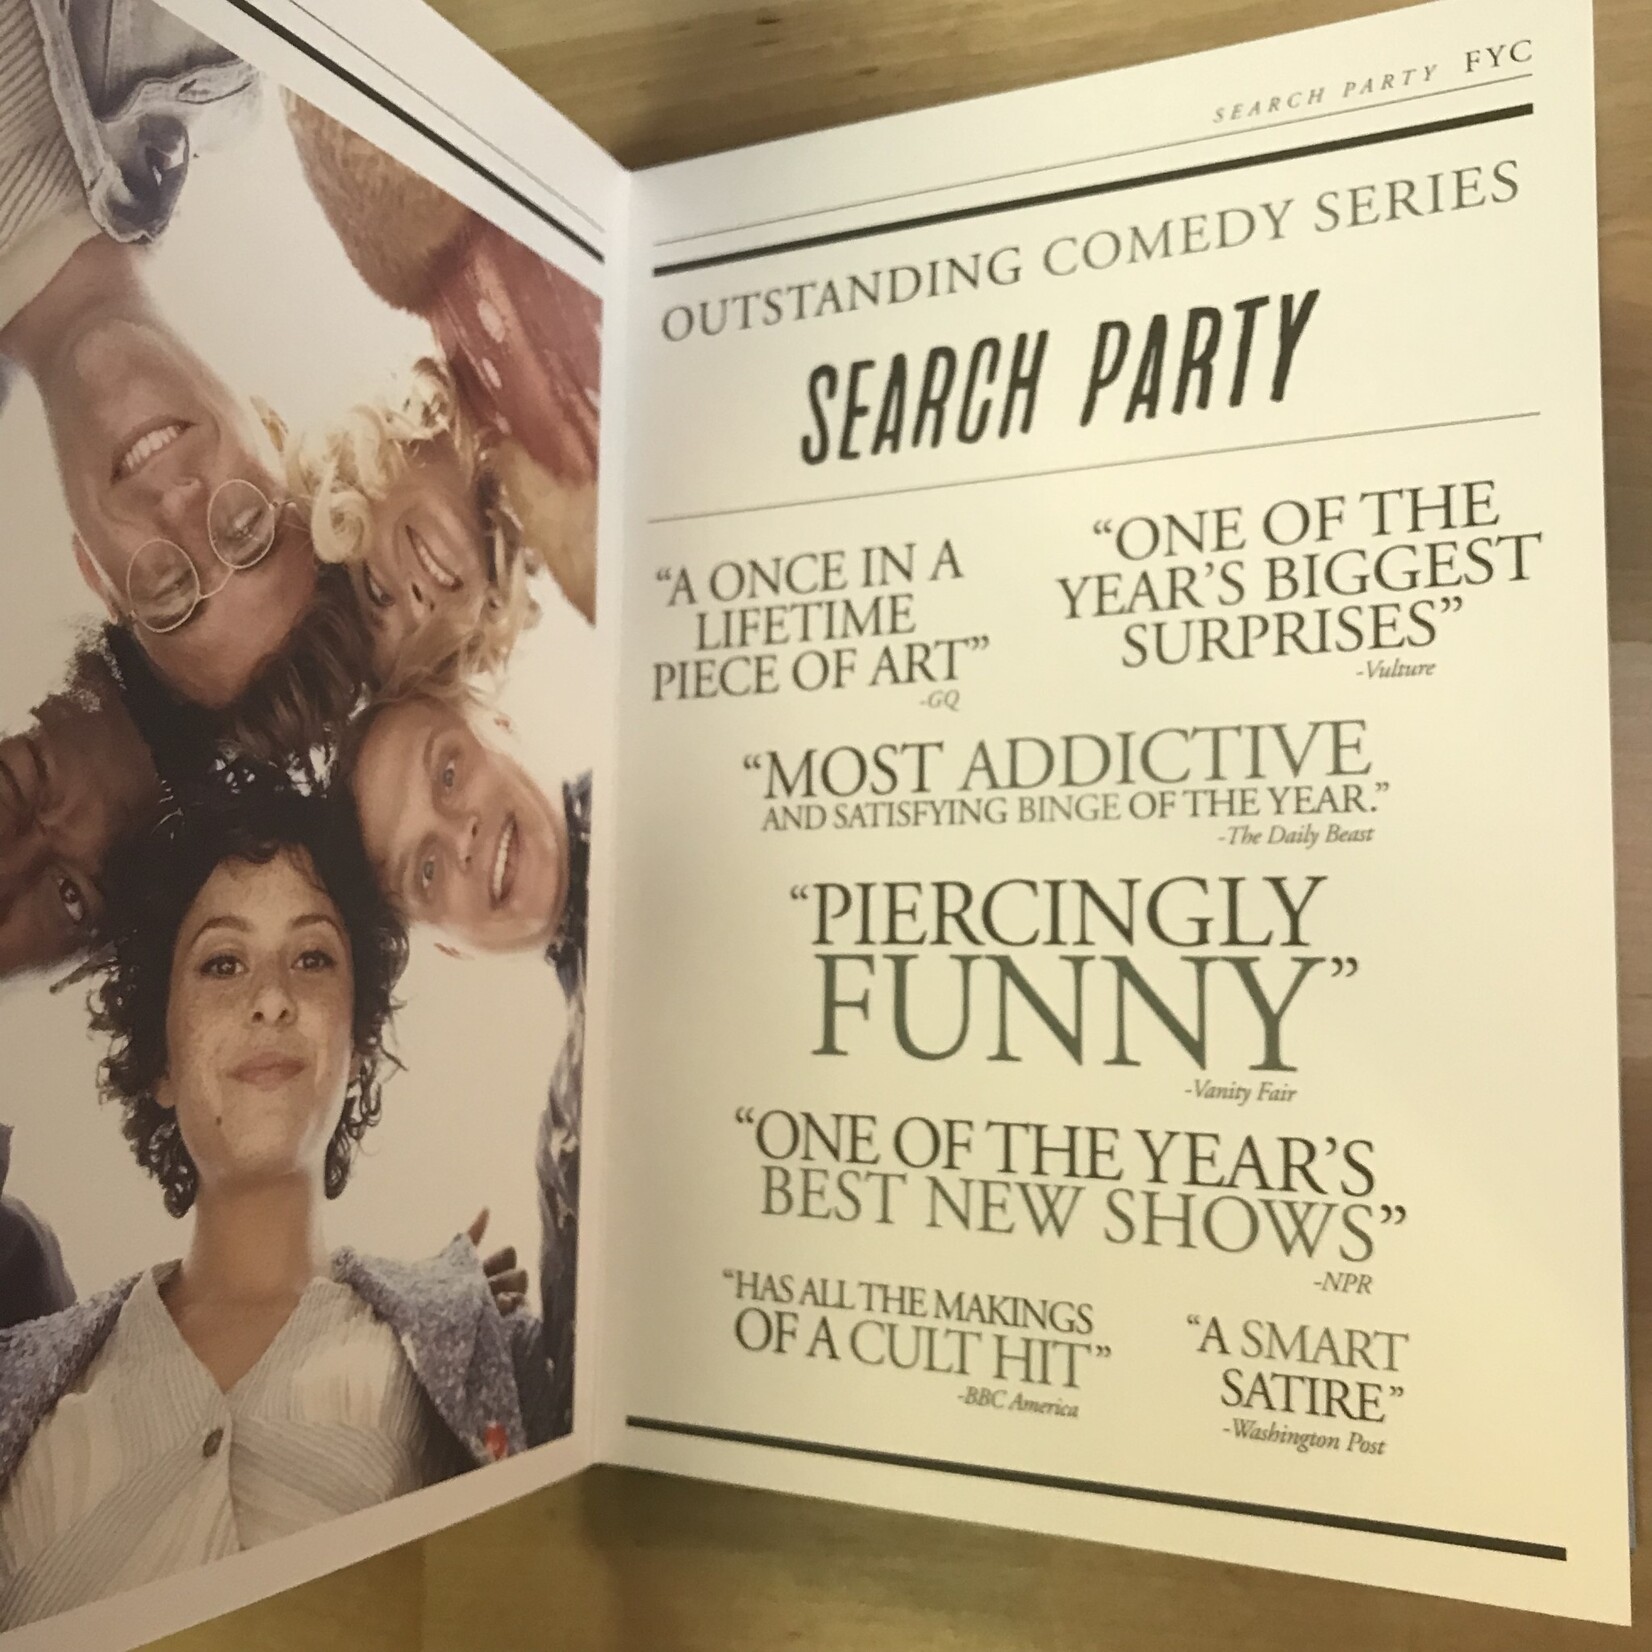 Search Party - For Your Consideration Special Edition - DVD (USED)